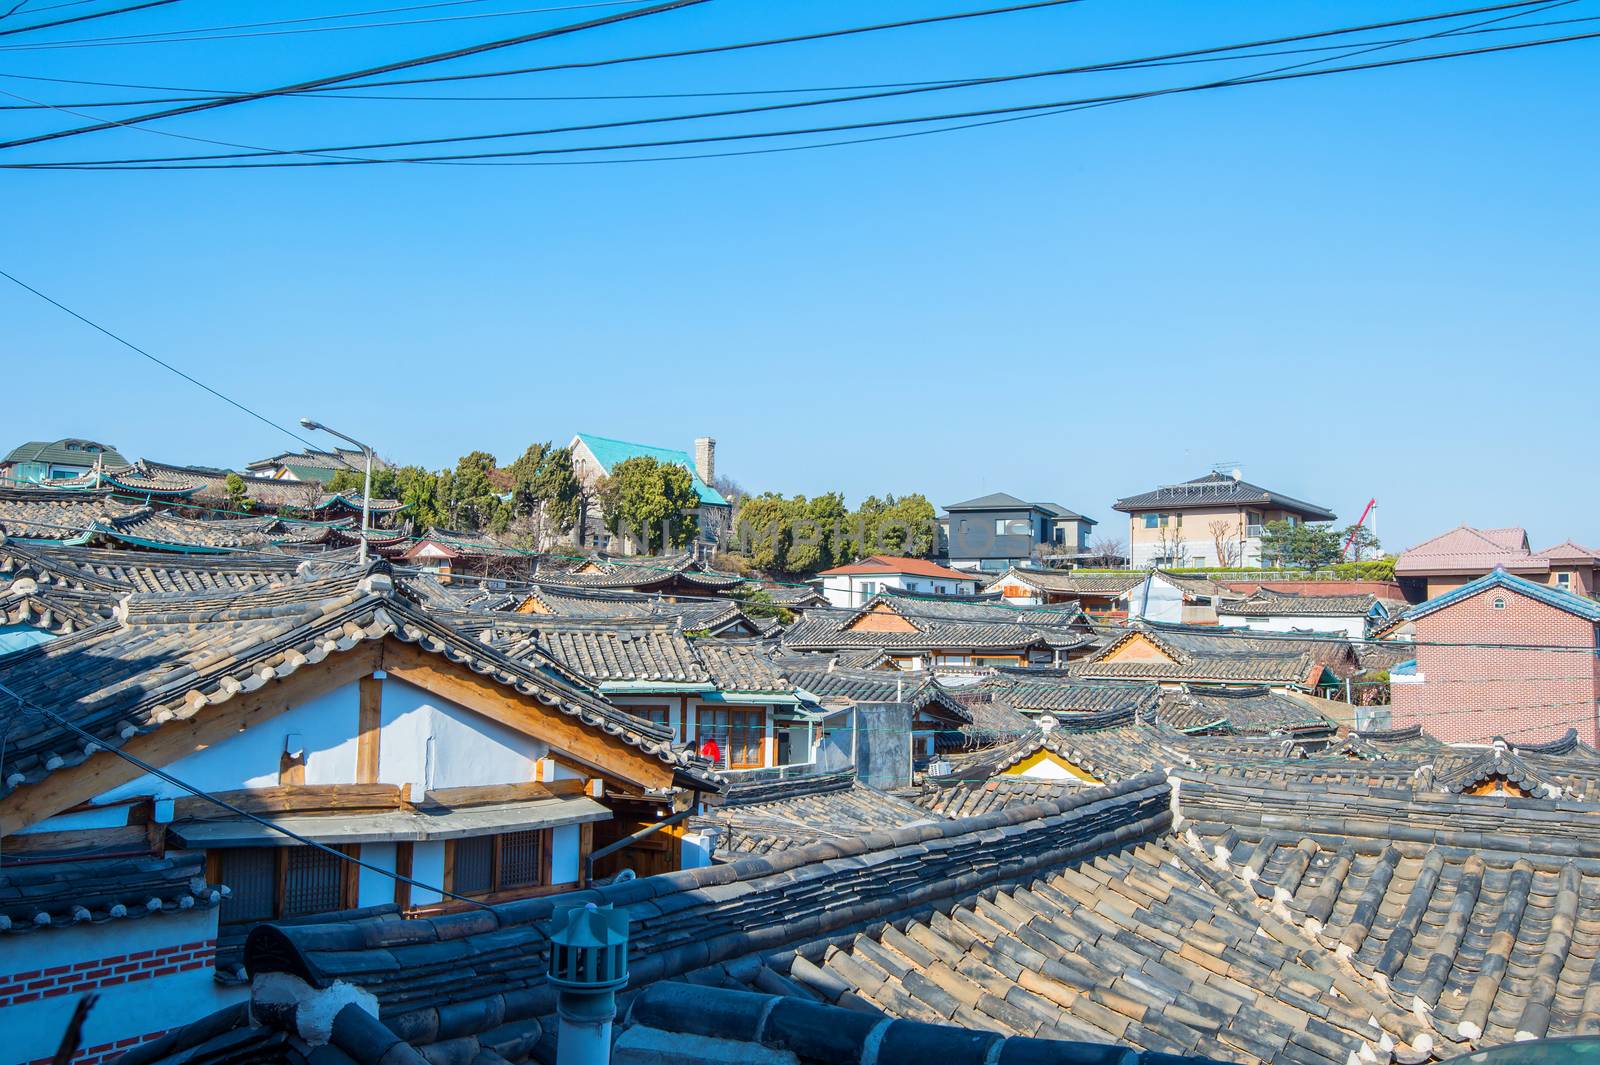 Bukchon Hanok Village,Traditional Korean style architecture in S by gutarphotoghaphy